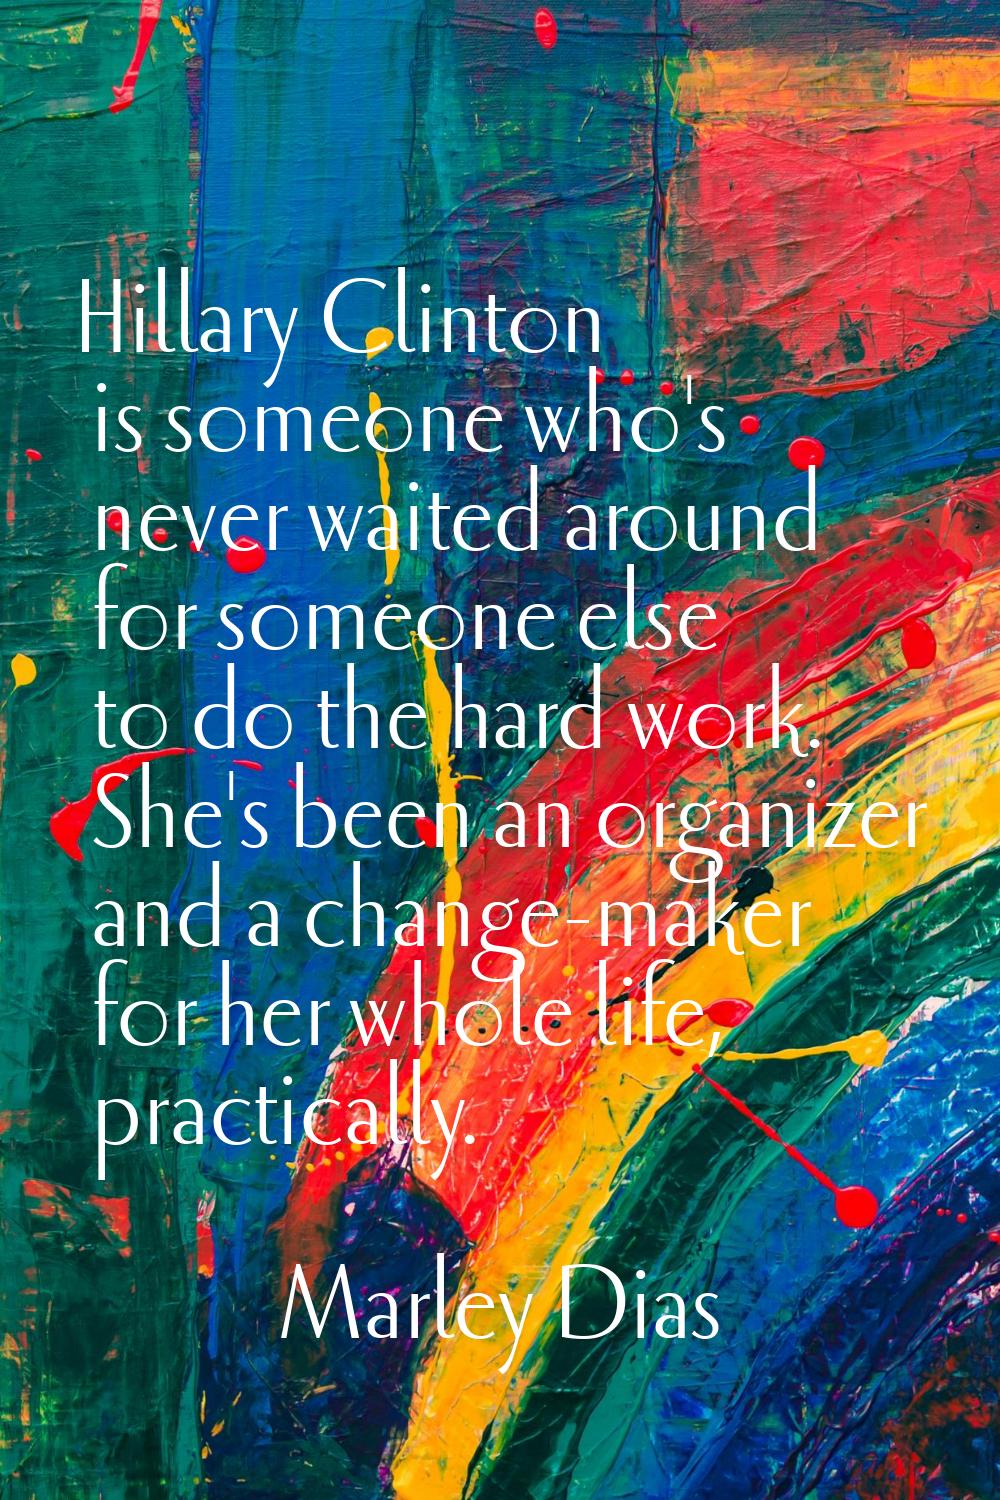 Hillary Clinton is someone who's never waited around for someone else to do the hard work. She's be